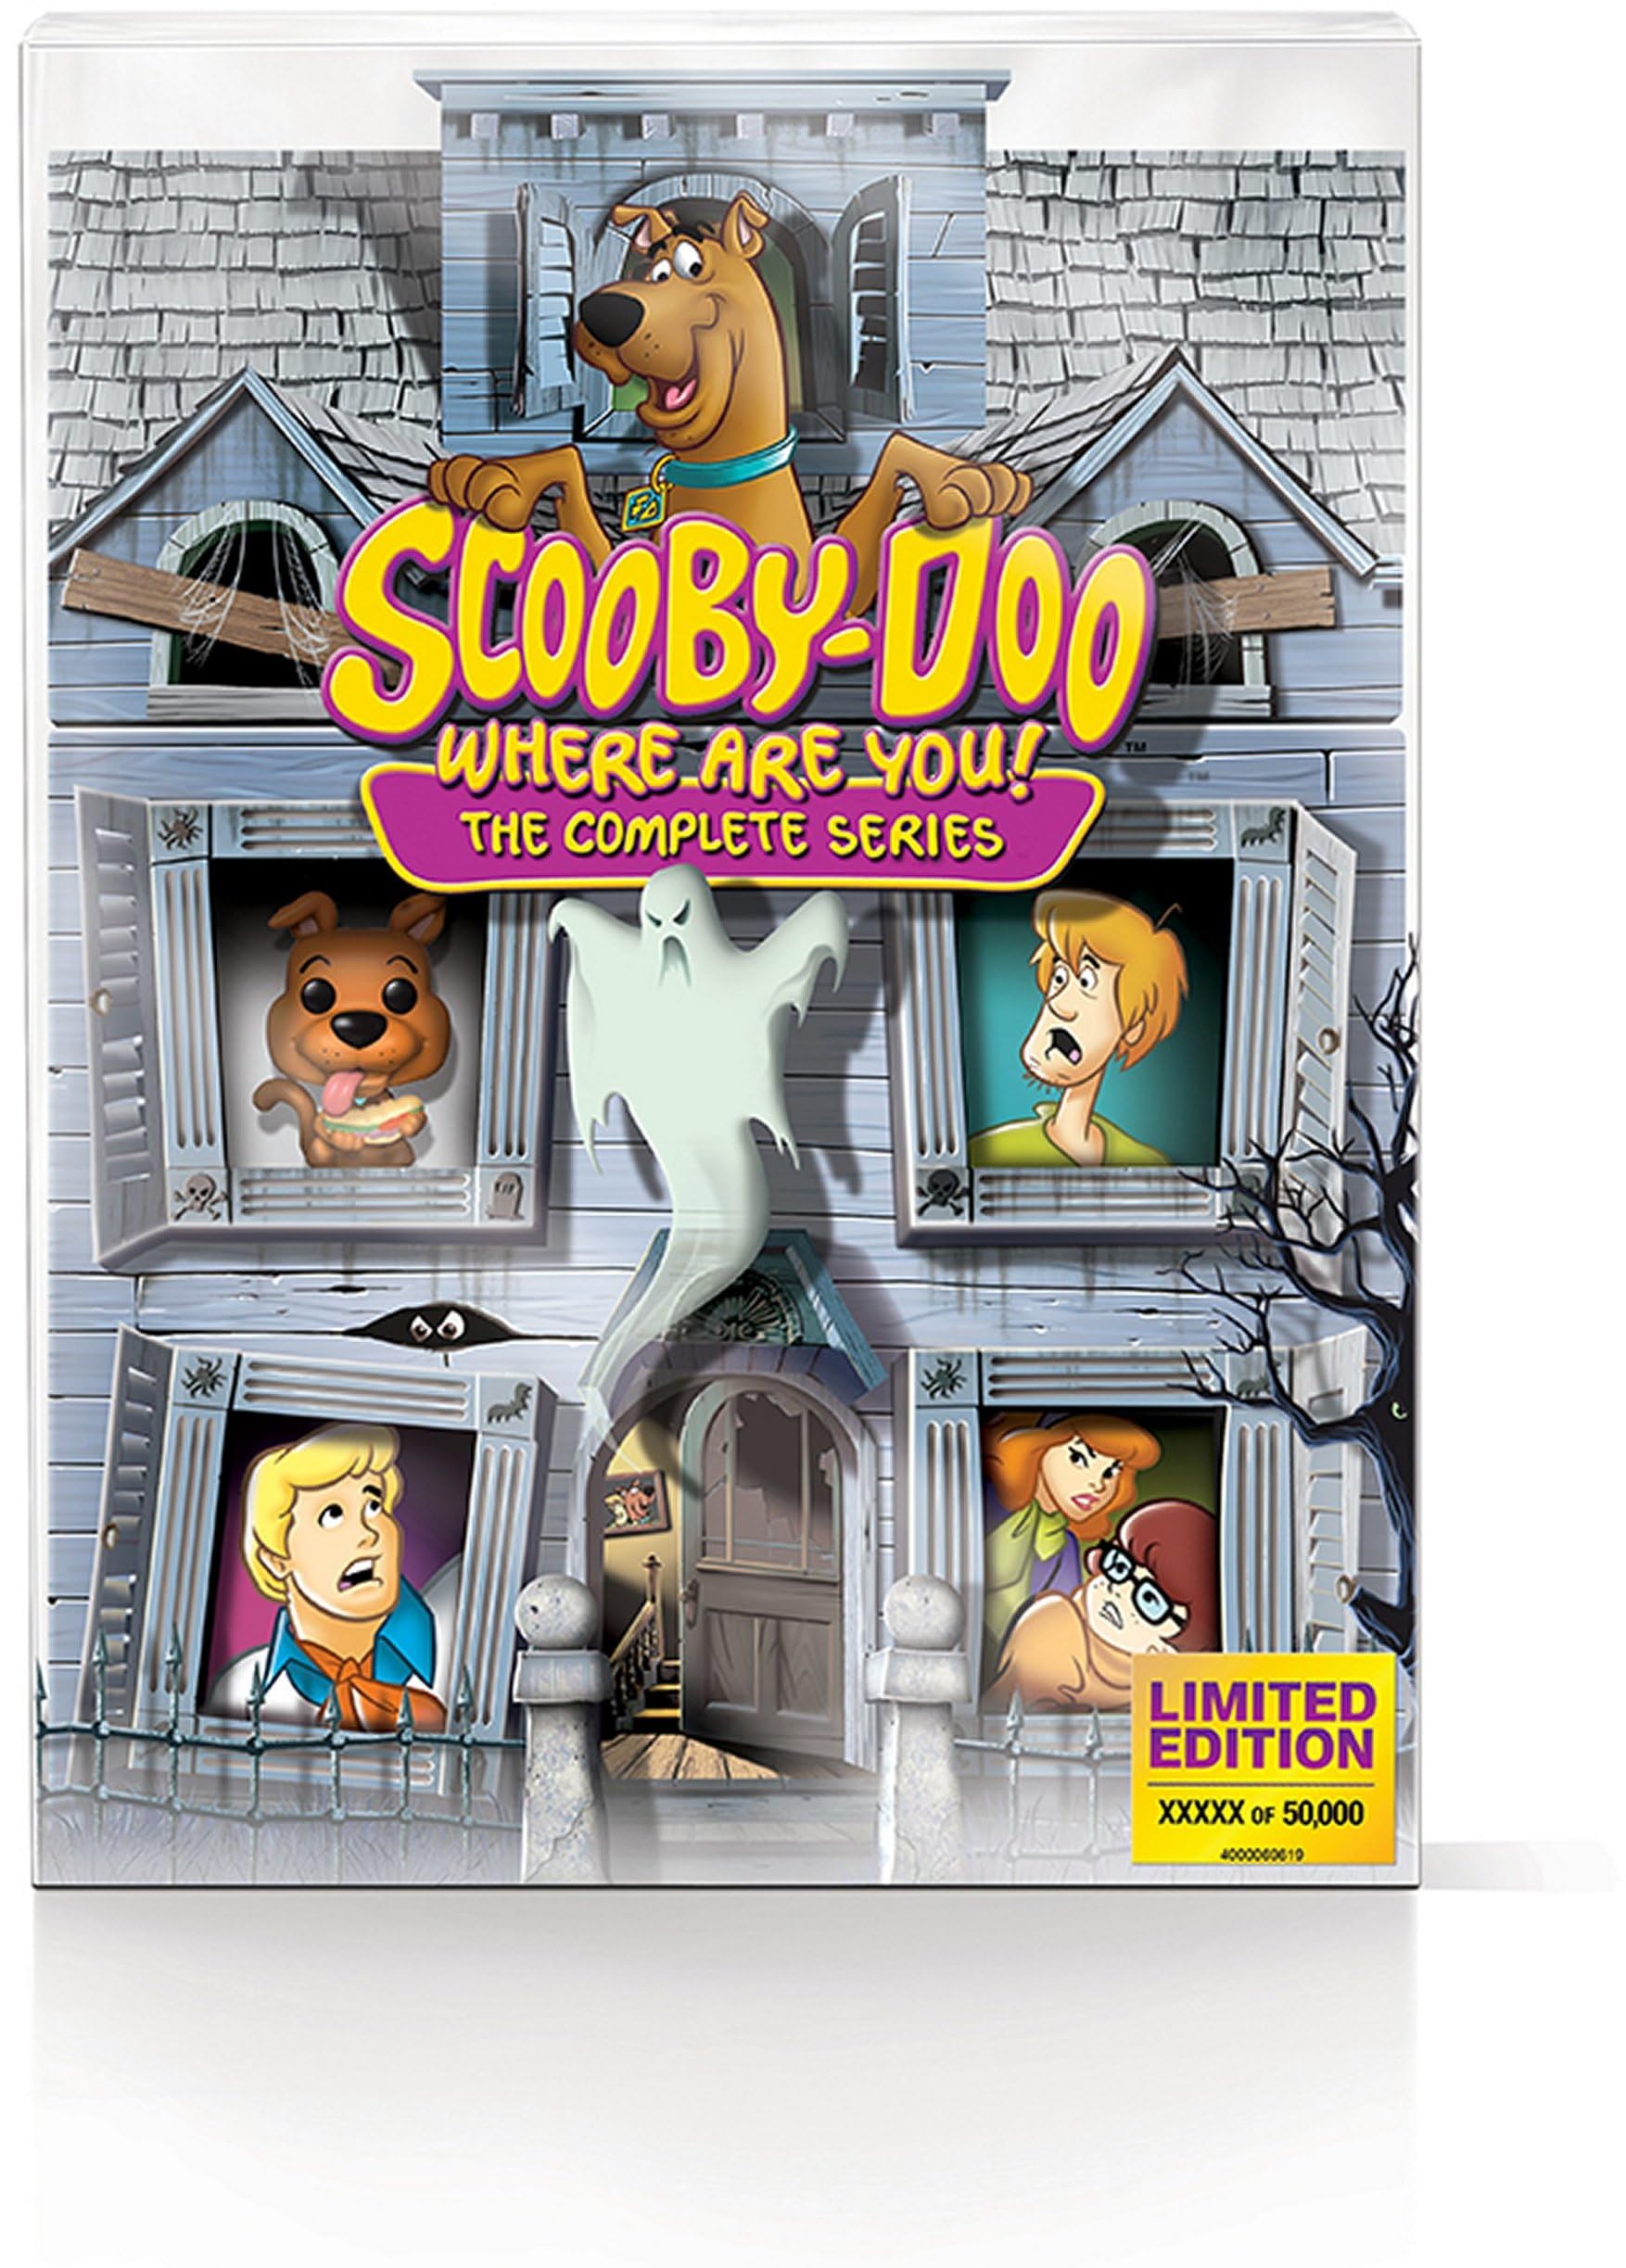 Scooby-Doo, Where Are You!: The Complete Series Limited Edition 50th Ann Mystery Mansion w/ Funko Pop (Blu-ray) $30.49 + Free Shipping w/ Prime or on Orders $35+